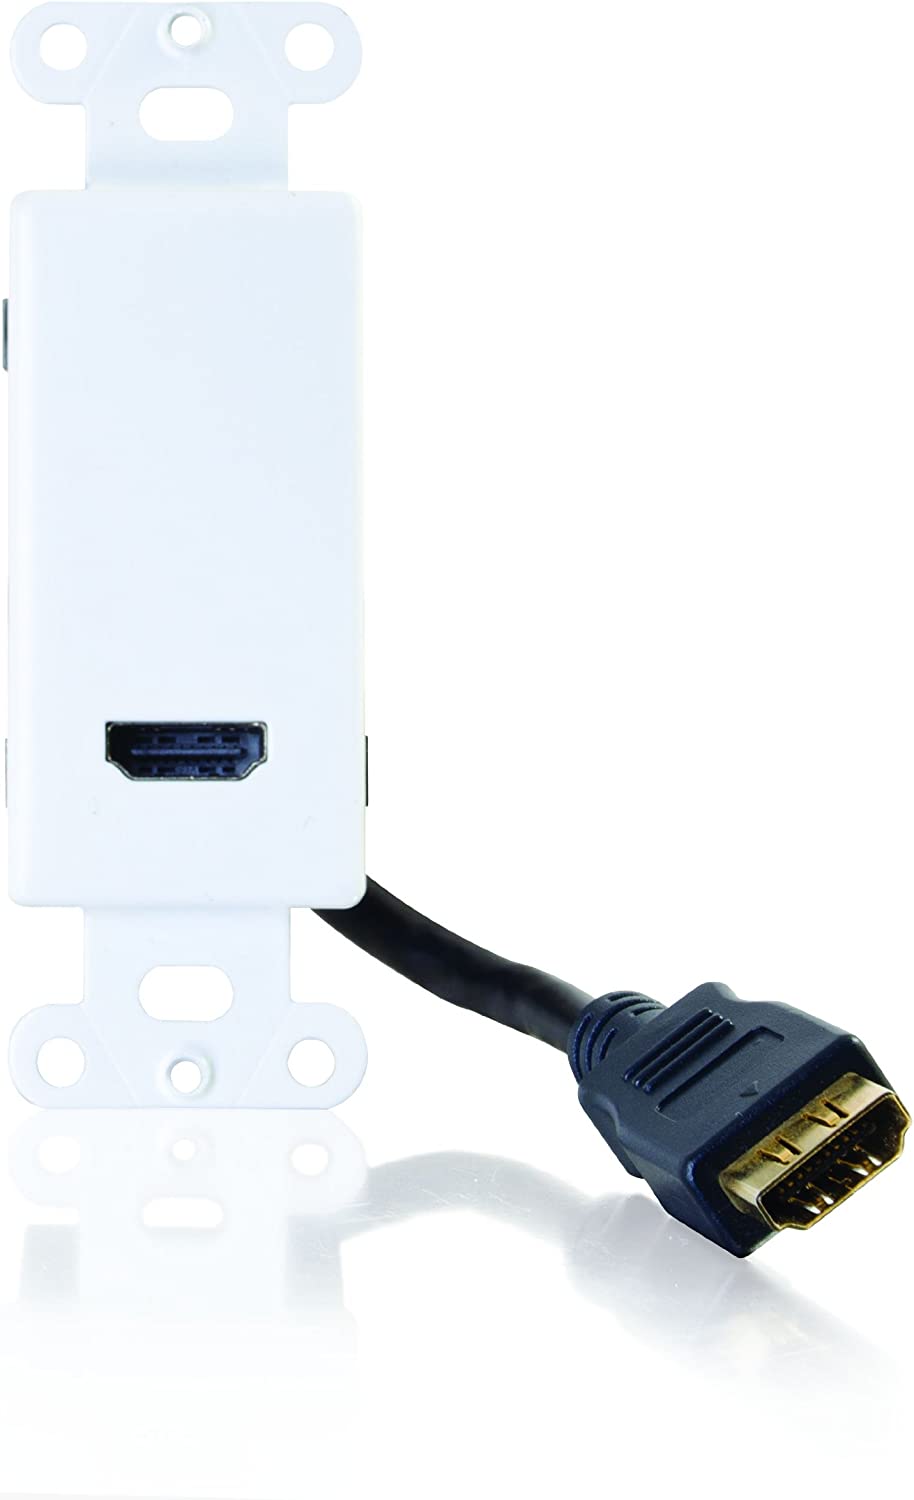 C2g/ cables to go C2G 41043 HDMI Pass Through Wall Plate, White